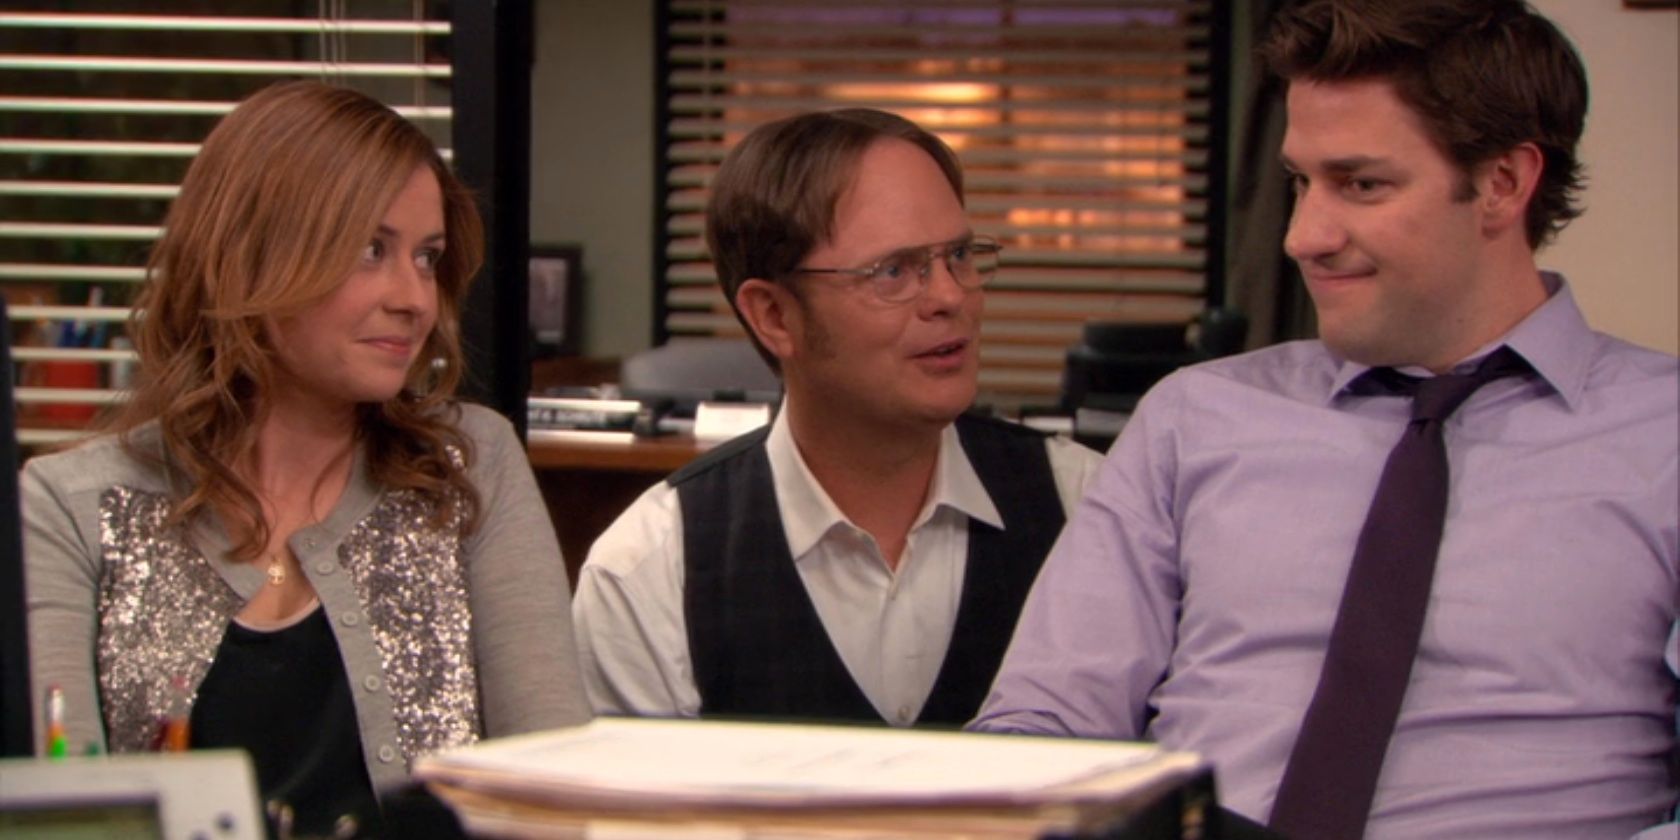 Pam Dwight and Jim talking in The Office finale